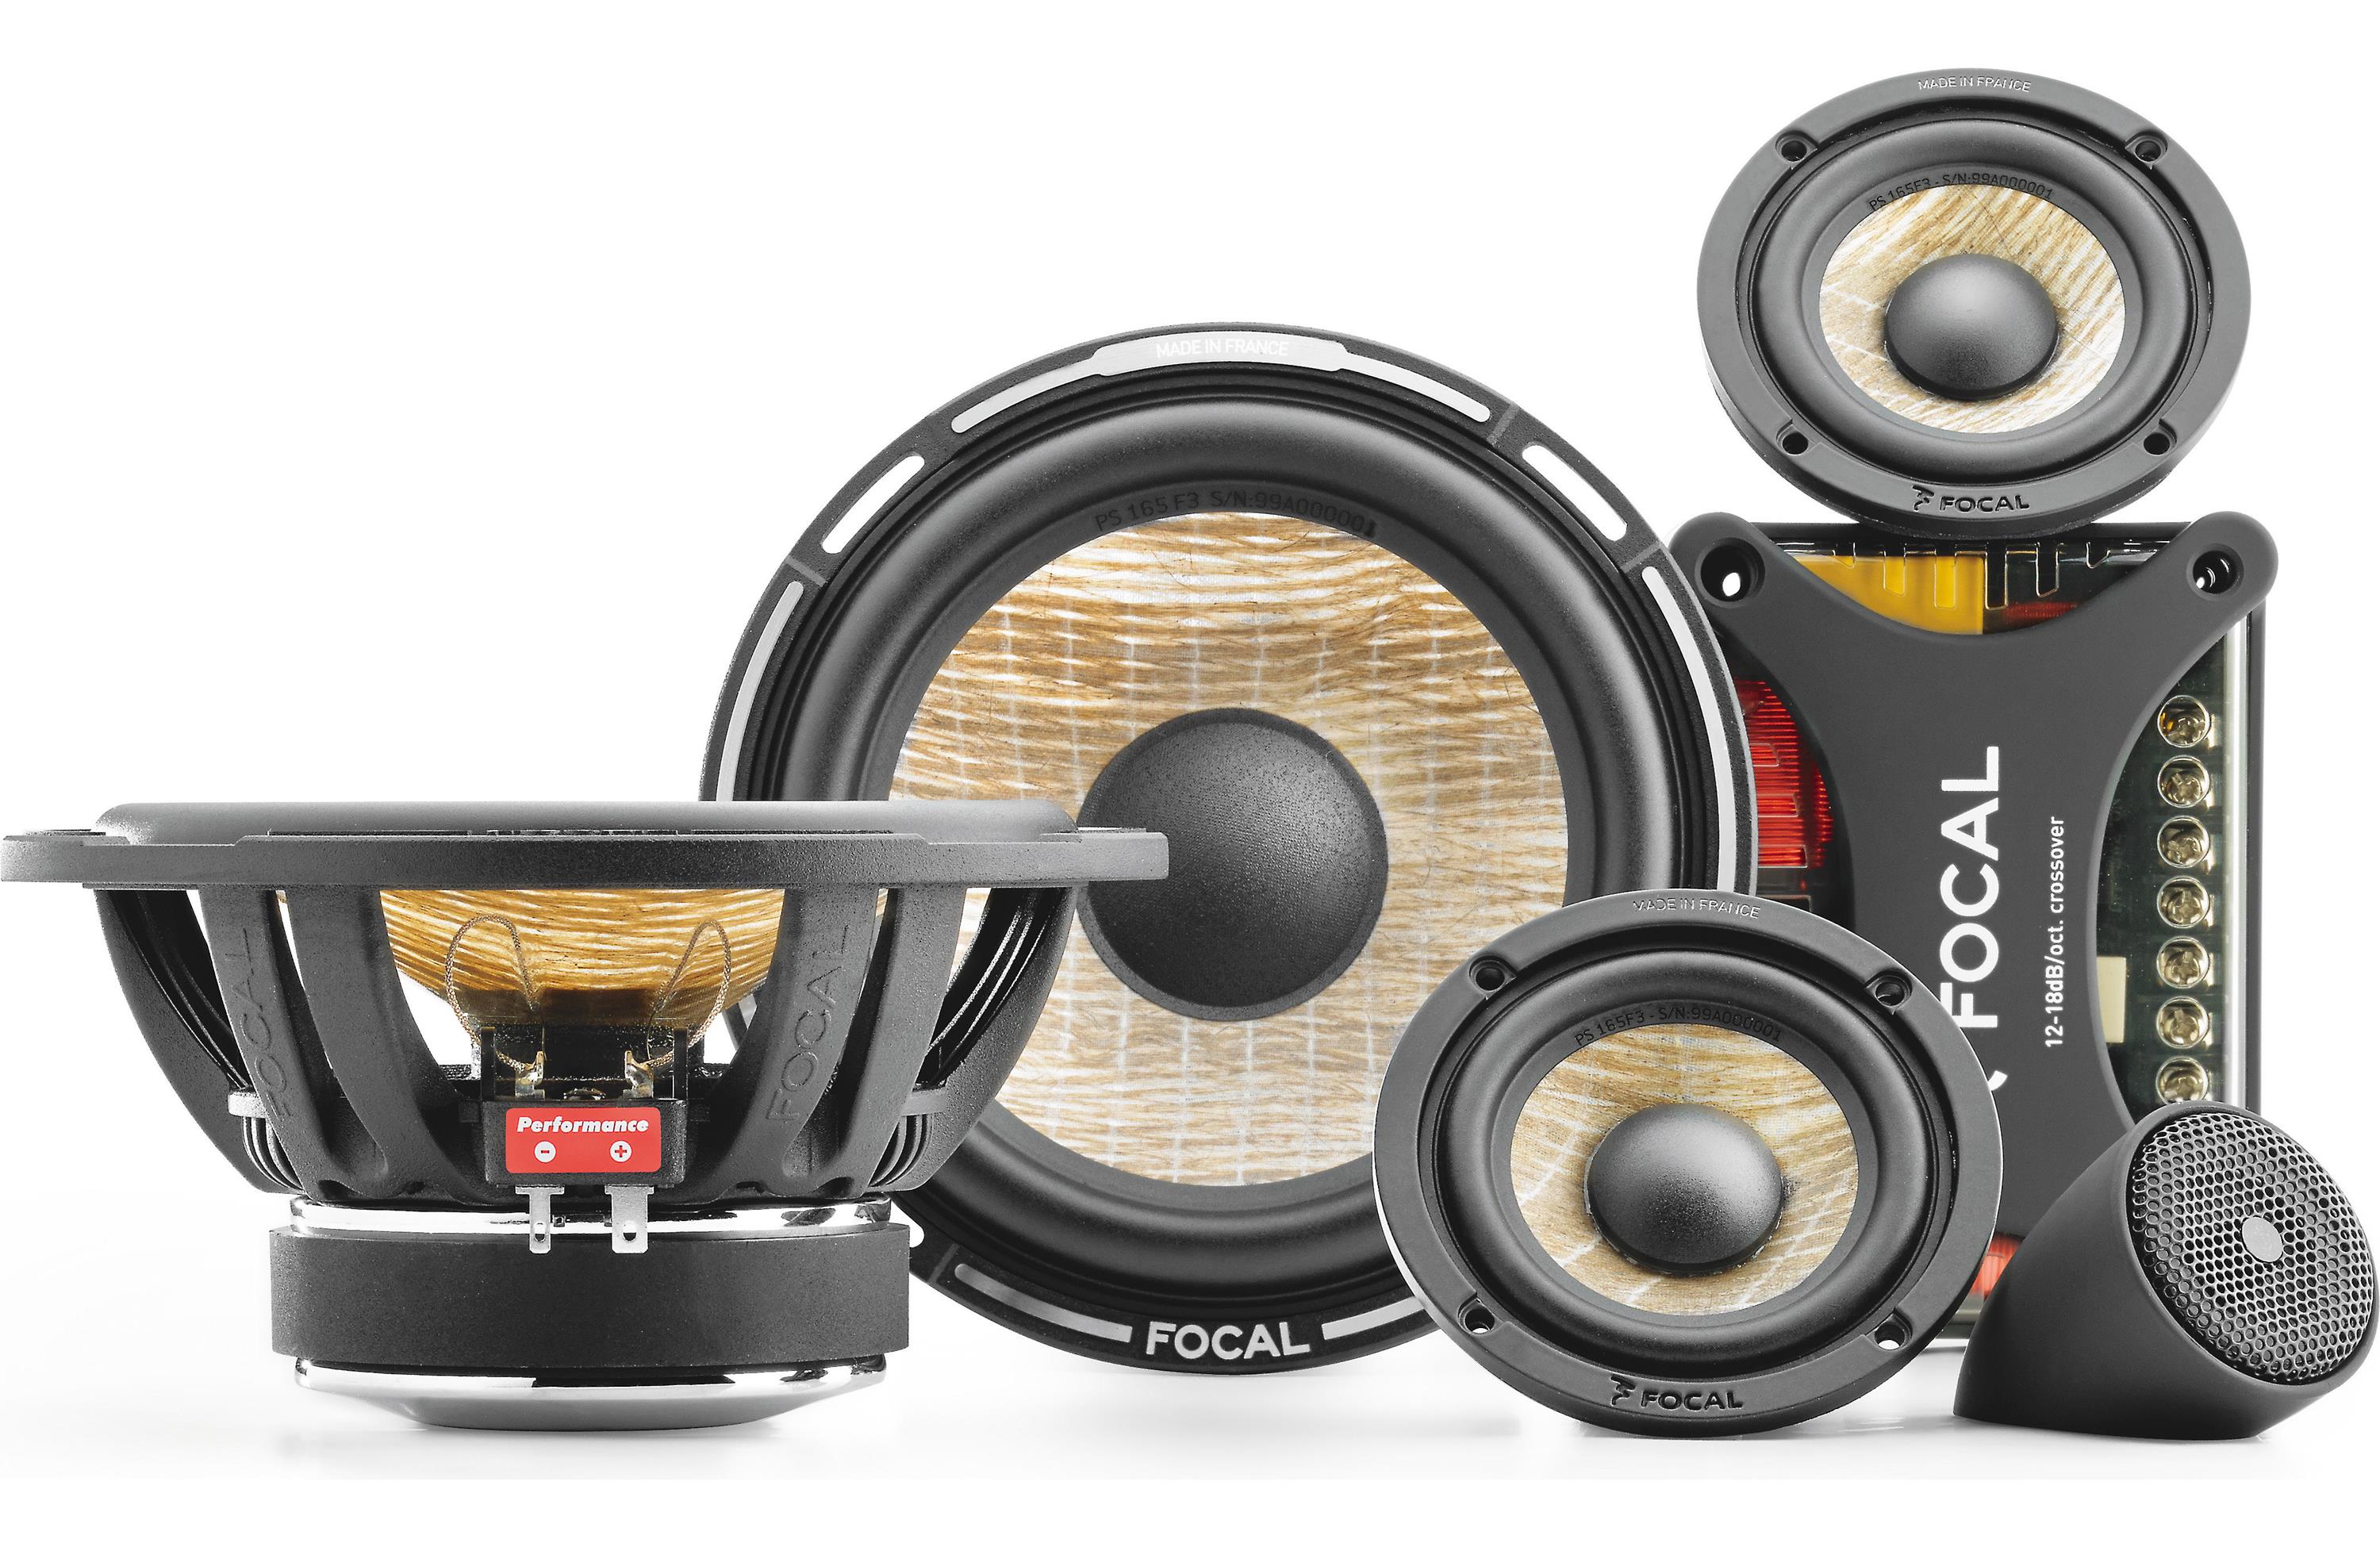 donor Wolkenkrabber Regelen Focal PS 165 F3 - FLAX CONE 6.5 Inch and 3 Inch 3-Way Component Kit -  Component car speaker systems - Custom Sounds & Tint